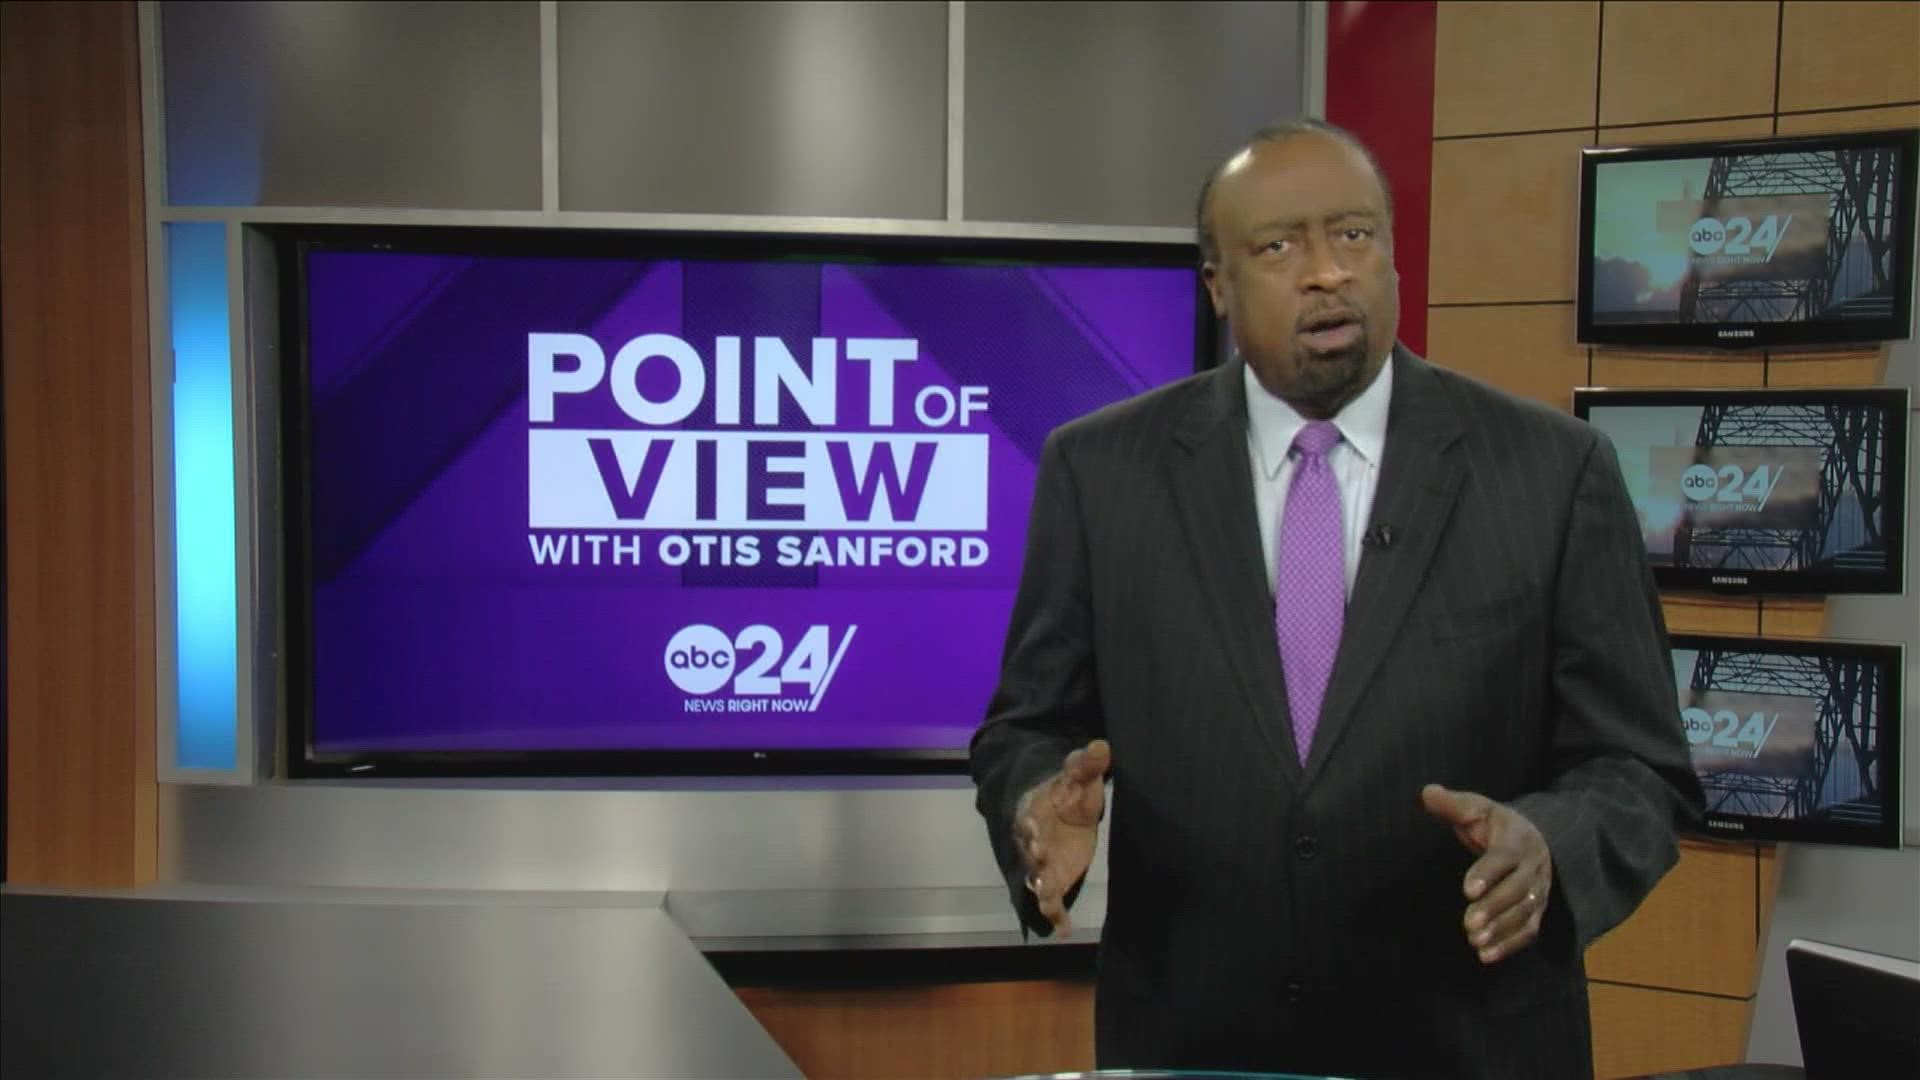 ABC 24 political analyst and commentator Otis Sanford shared his point of view on MLGW and the power problems in Memphis.